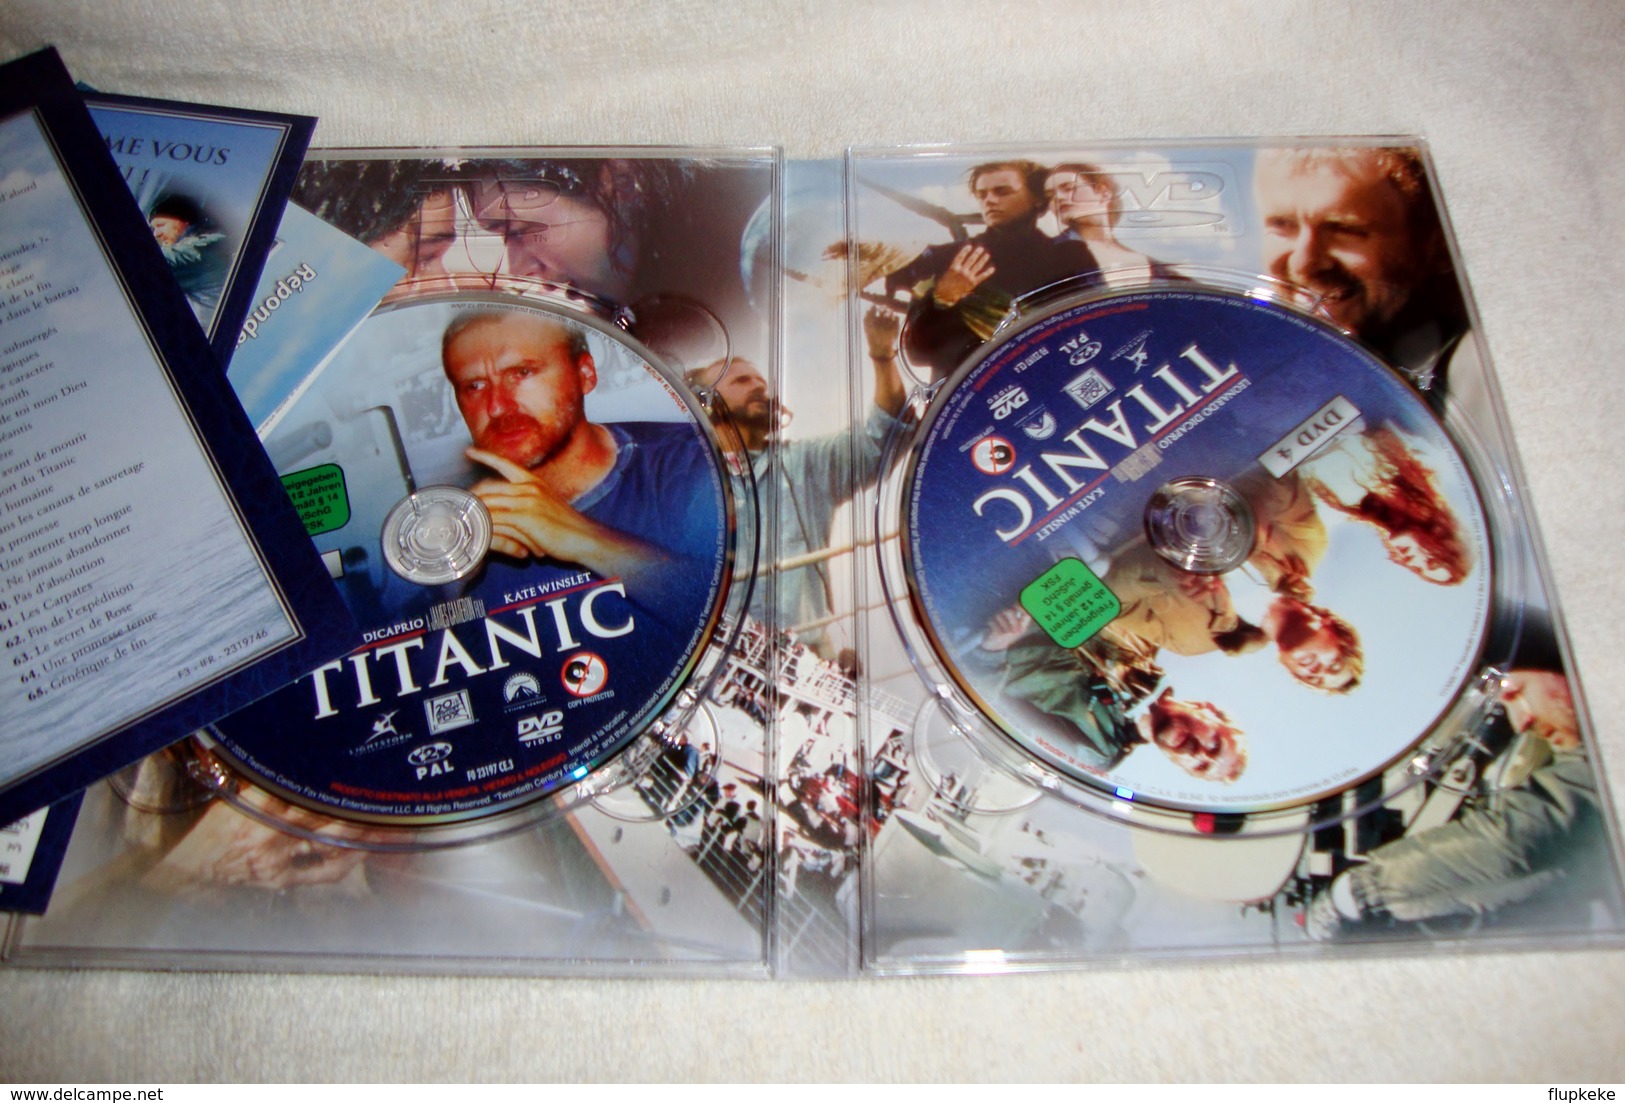 Dvd Zone 2 Titanic (1997) Édition Collector DeLuxe 4 dvd vf+Vostfr